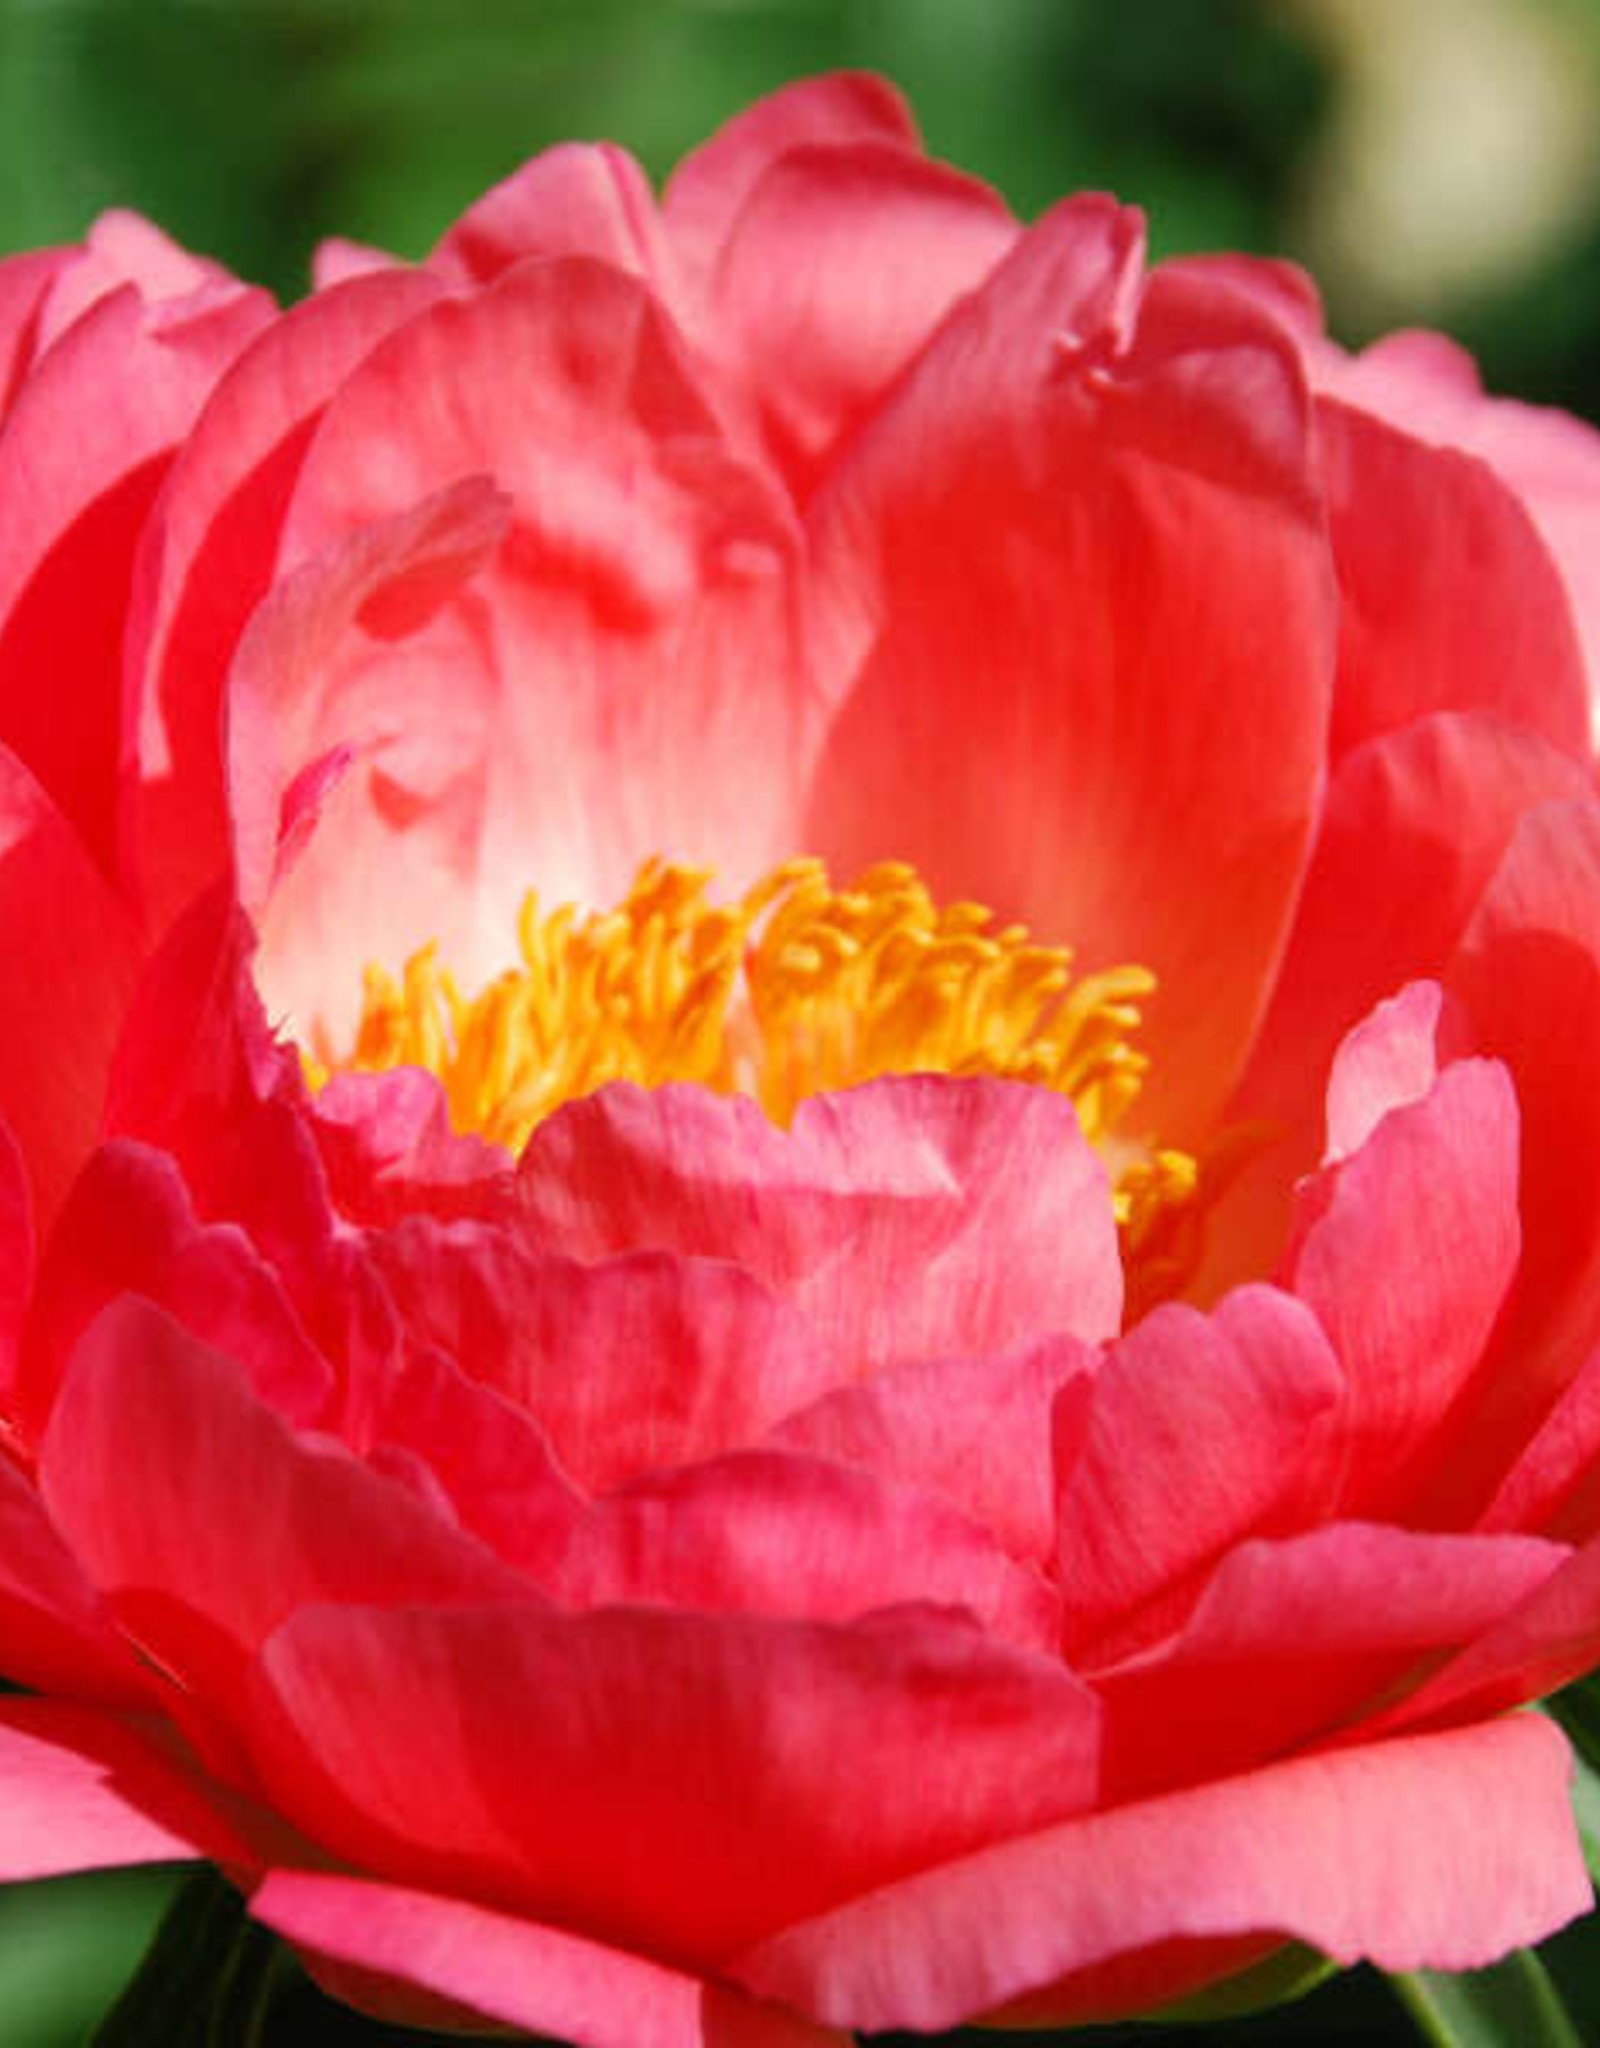 Walters Gardens PAEONIA 'Coral Sunset' (coral) #1 3E